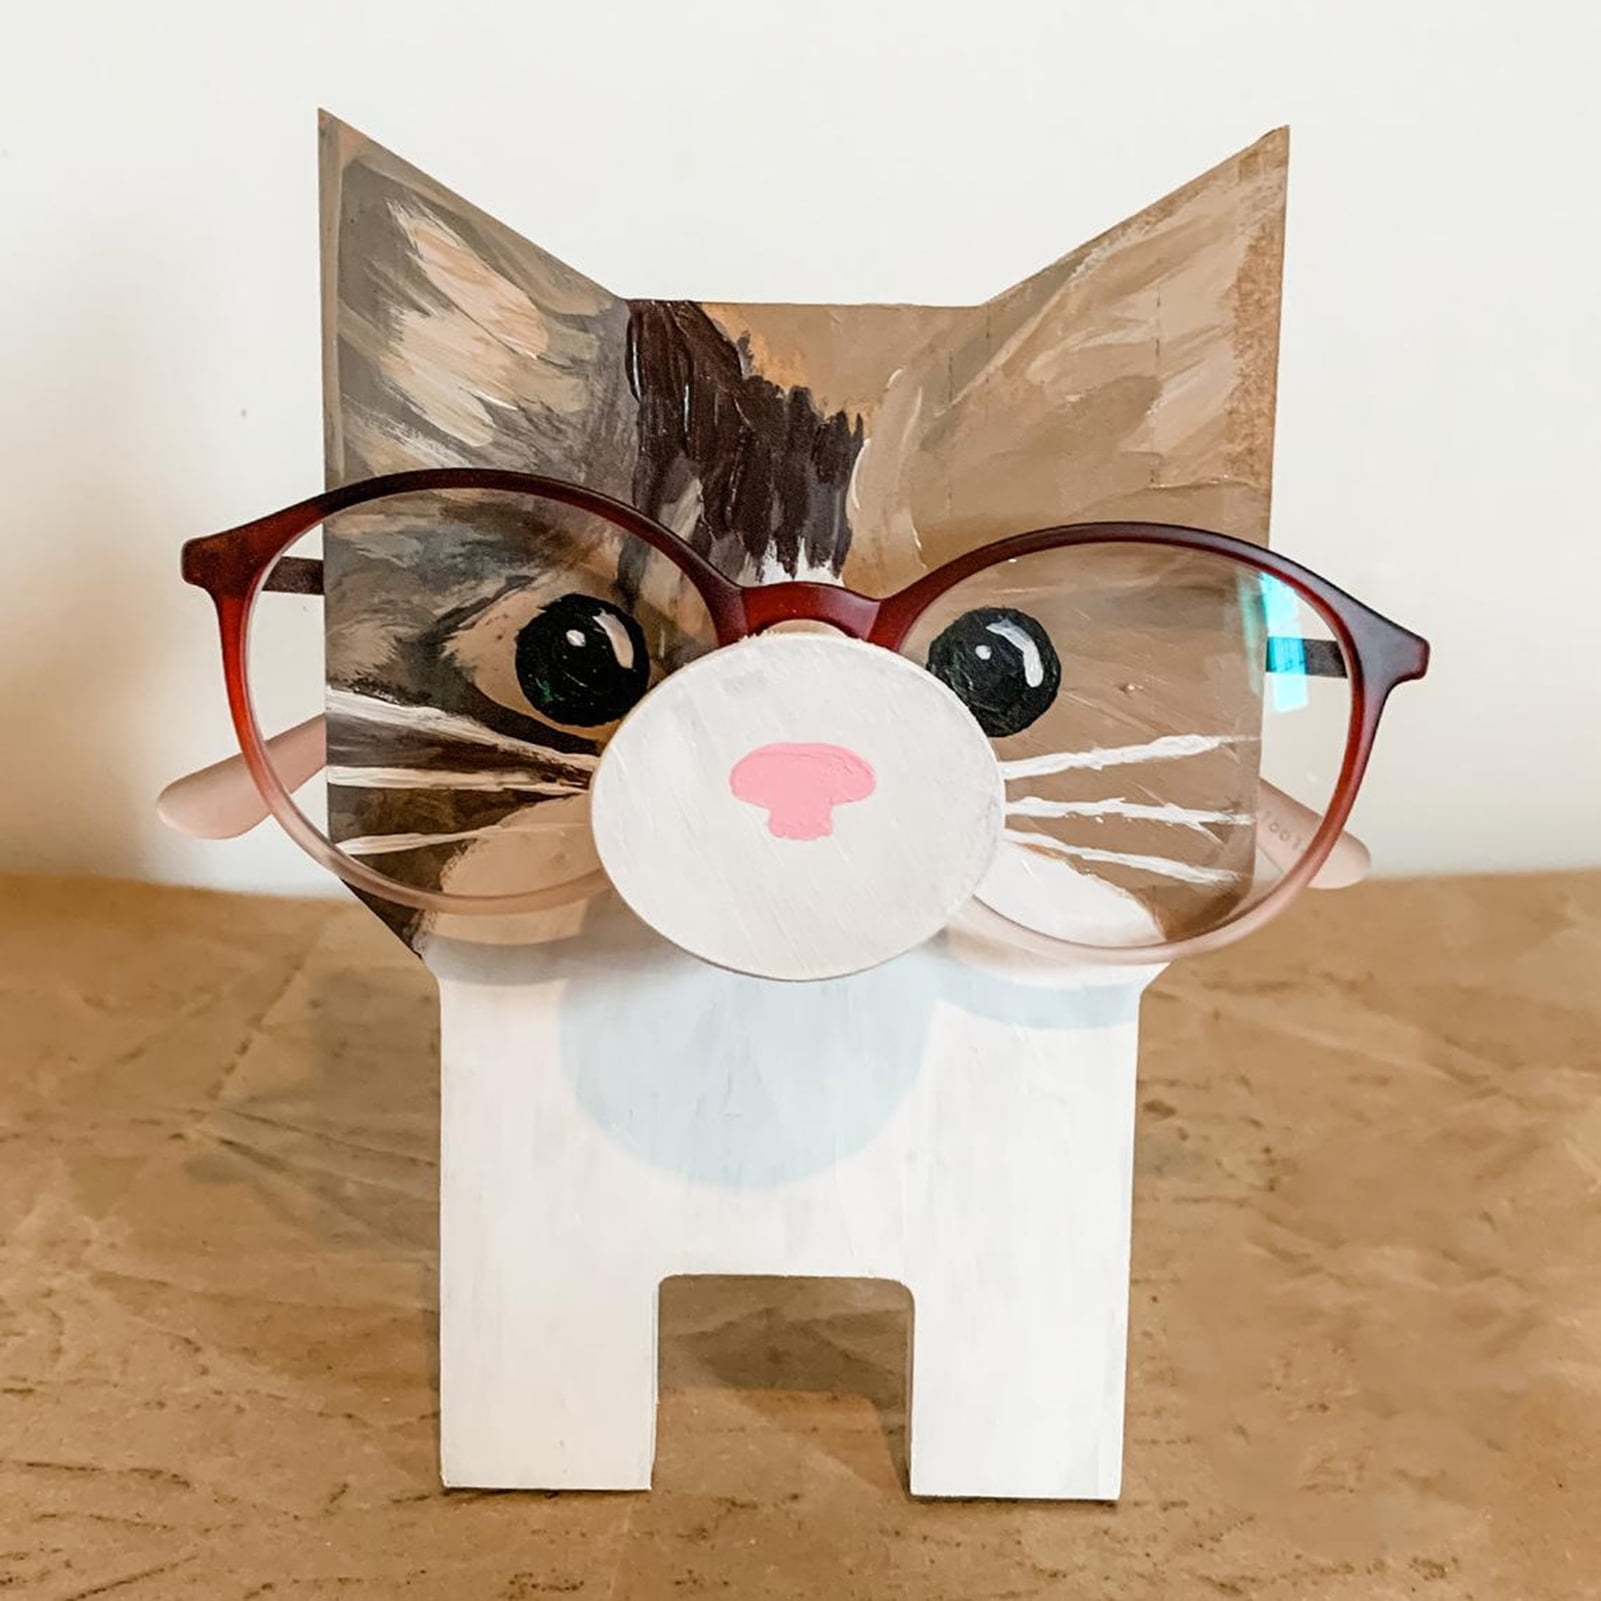  Artistic(TM) - Handmade Wooden Spectacle Holder Eyeglass Holder  Dog Display Stand for Home Office Desk Decor Accessories, 7 inches(H), Best  Eyeglass holder you can ever have!! : Home & Kitchen